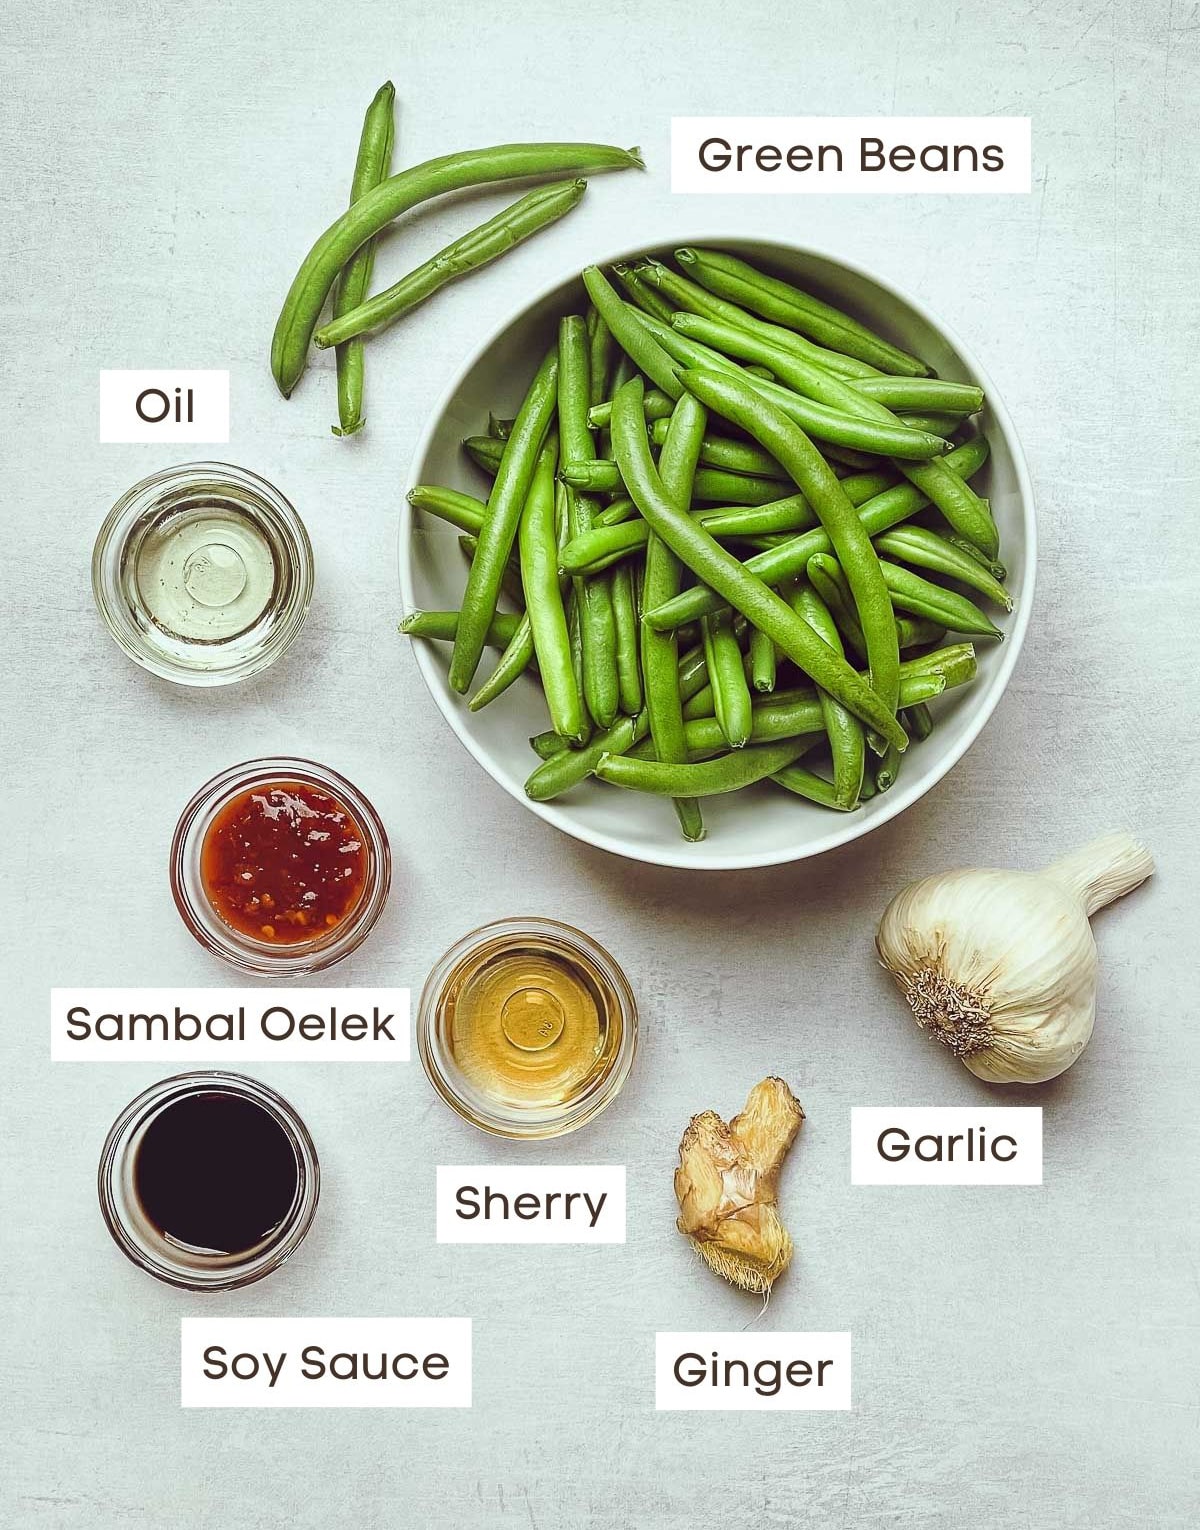 Labeled ingredients in small bowls for making Chinese Garlic Green Beans.